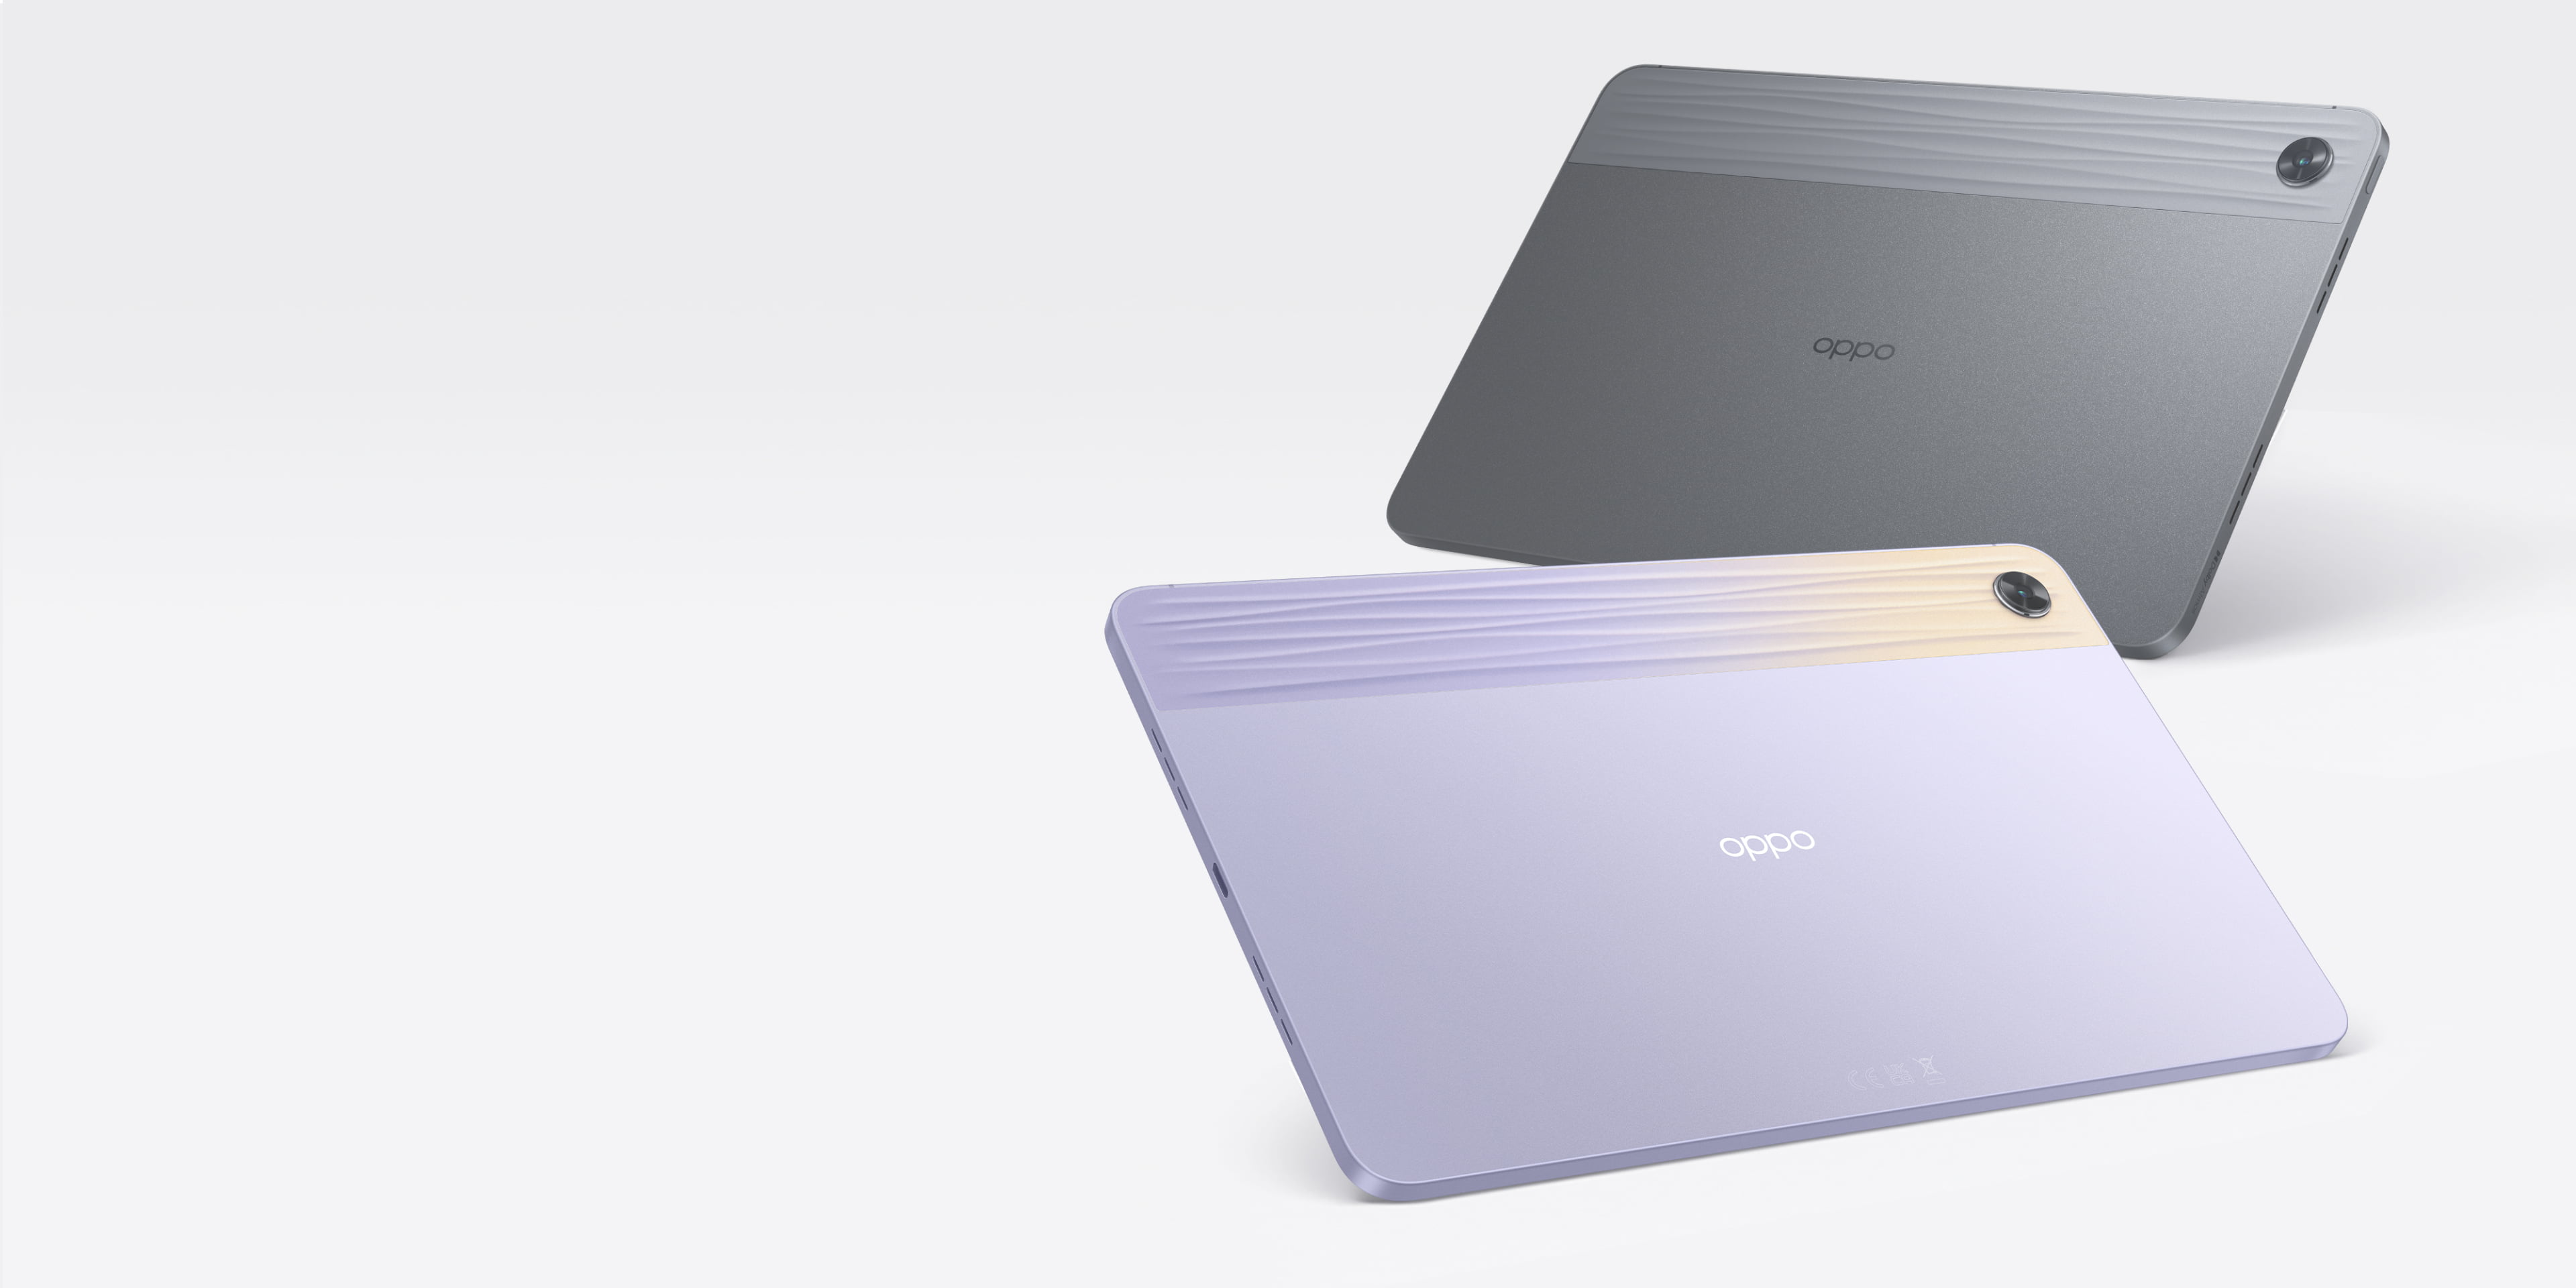 Oppo Pad Air 4/64. Oppo Pad 2. Дисплей Oppo Pad Air Qlty-100. Планшет Oppo Pad Air opd2102a 128gb Grey.